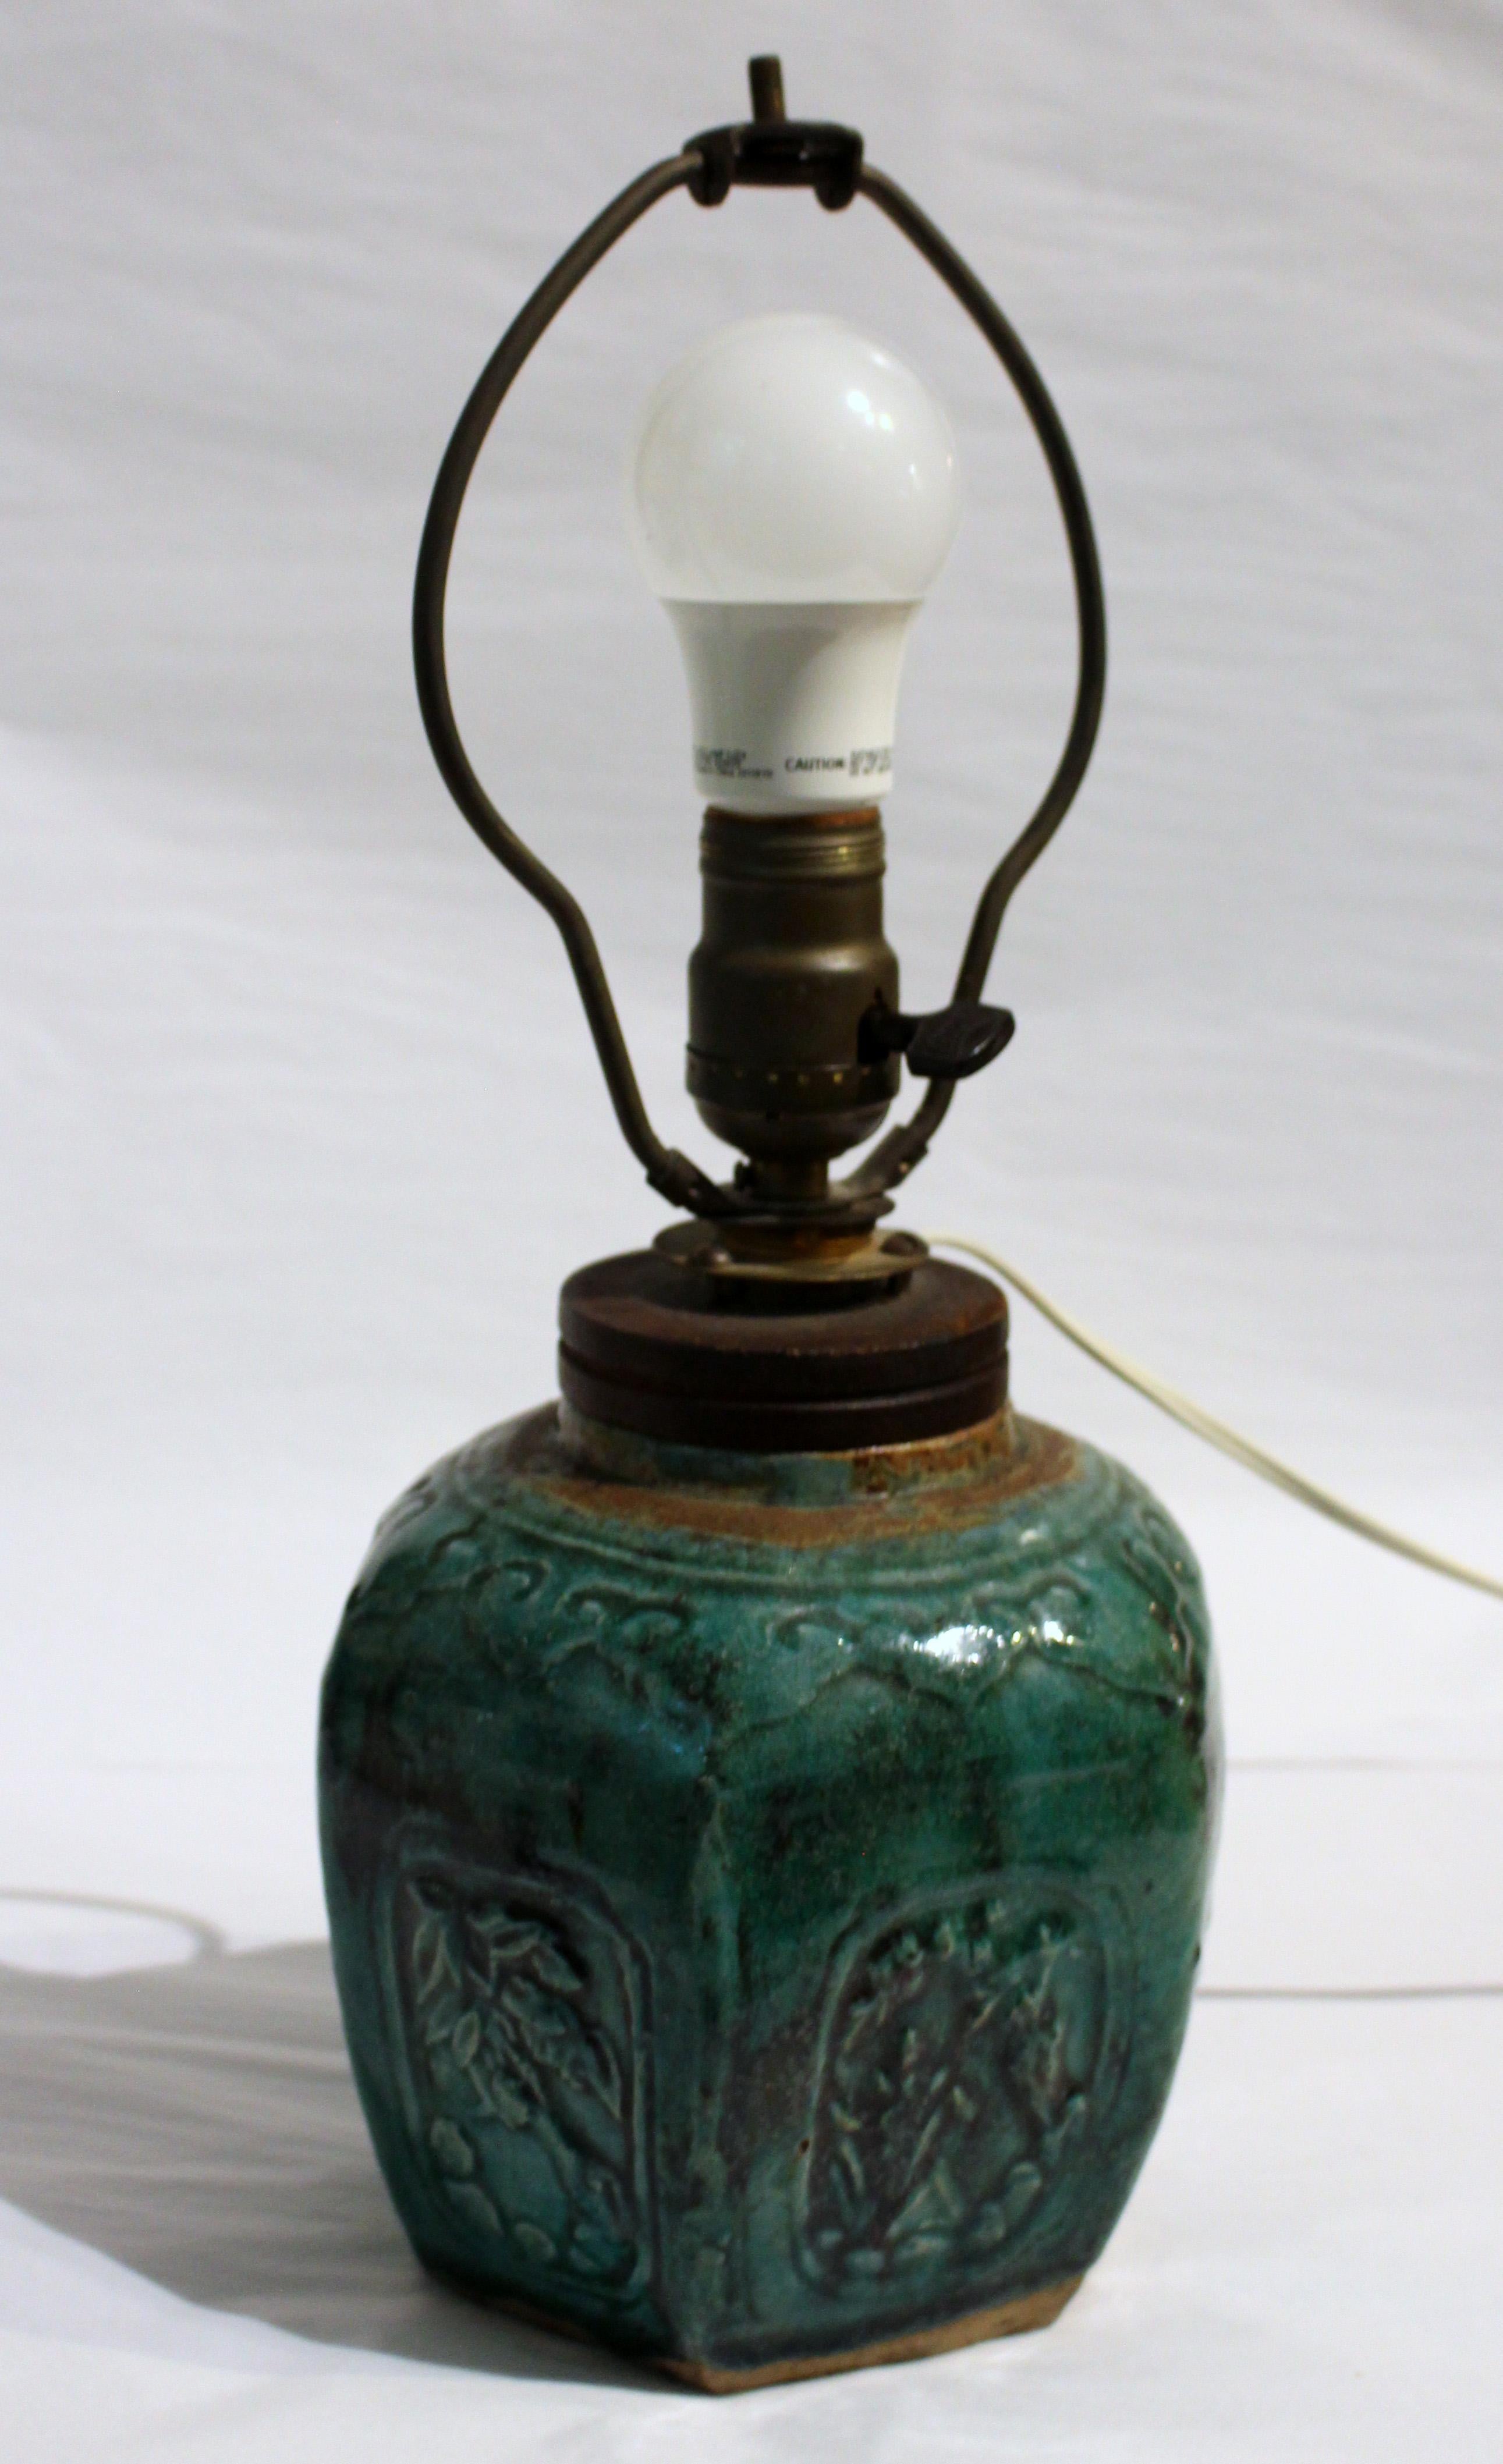 Mid-19th century ginger jar now mounted as a lamp. Chinese Qing dynasty hexagonal jar with molded panels of flowers, lappet shoulders. Four the Persian export market. Lamp sockets into mouth of jar. 16